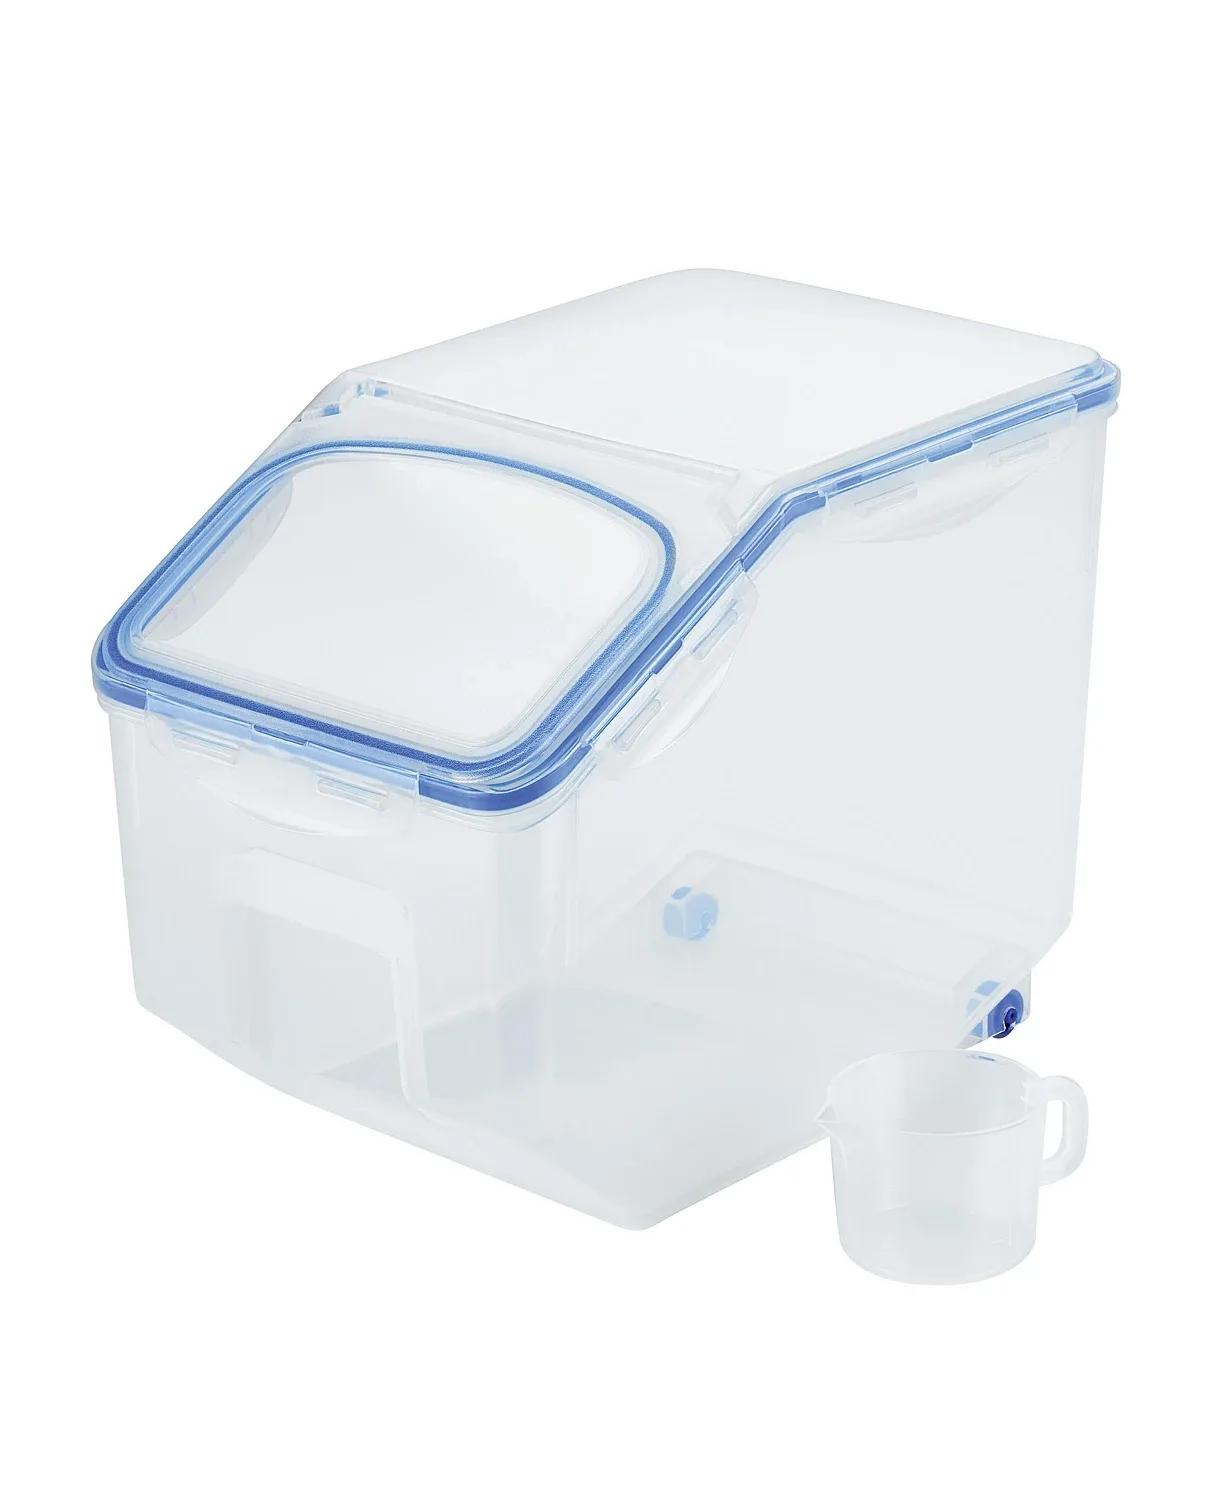 http://cdn.apartmenttherapy.info/image/upload/v1634309736/Lock%20n%20Lock%20Easy%20Essentials%20Food%20Storage%20Container%20with%20Flip%20Lid%20and%20Serving%20Cup.webp